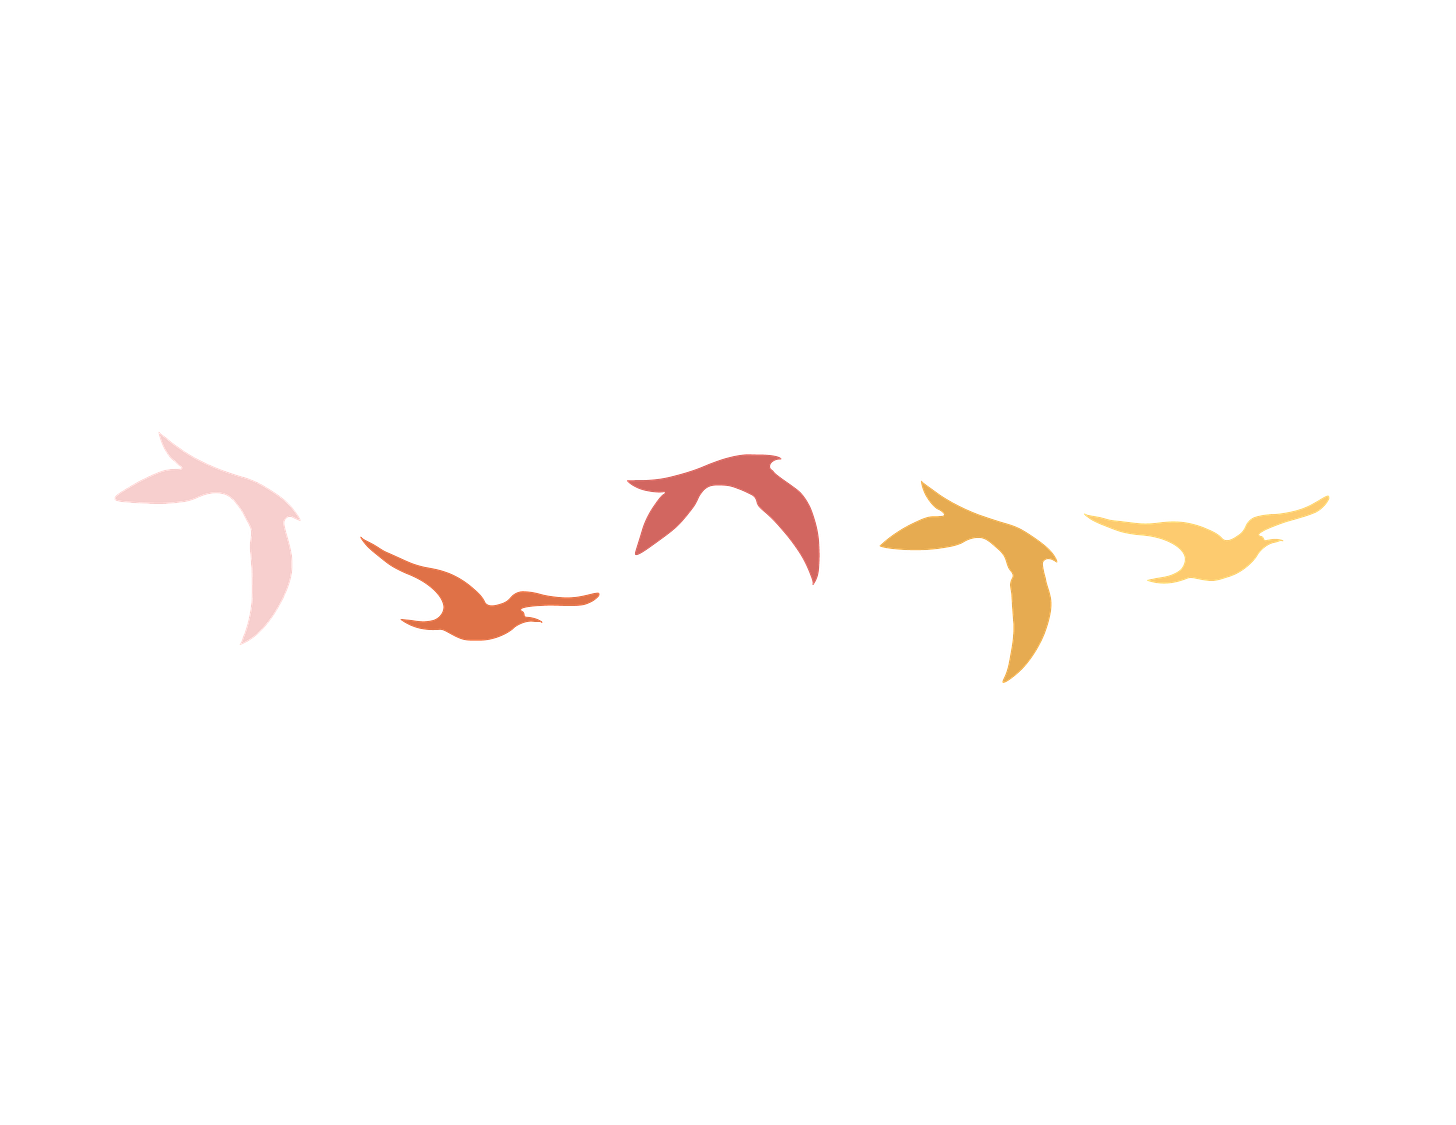 Five birds in various pink and orange colors - in graphic form - appear to be flying in the sky.